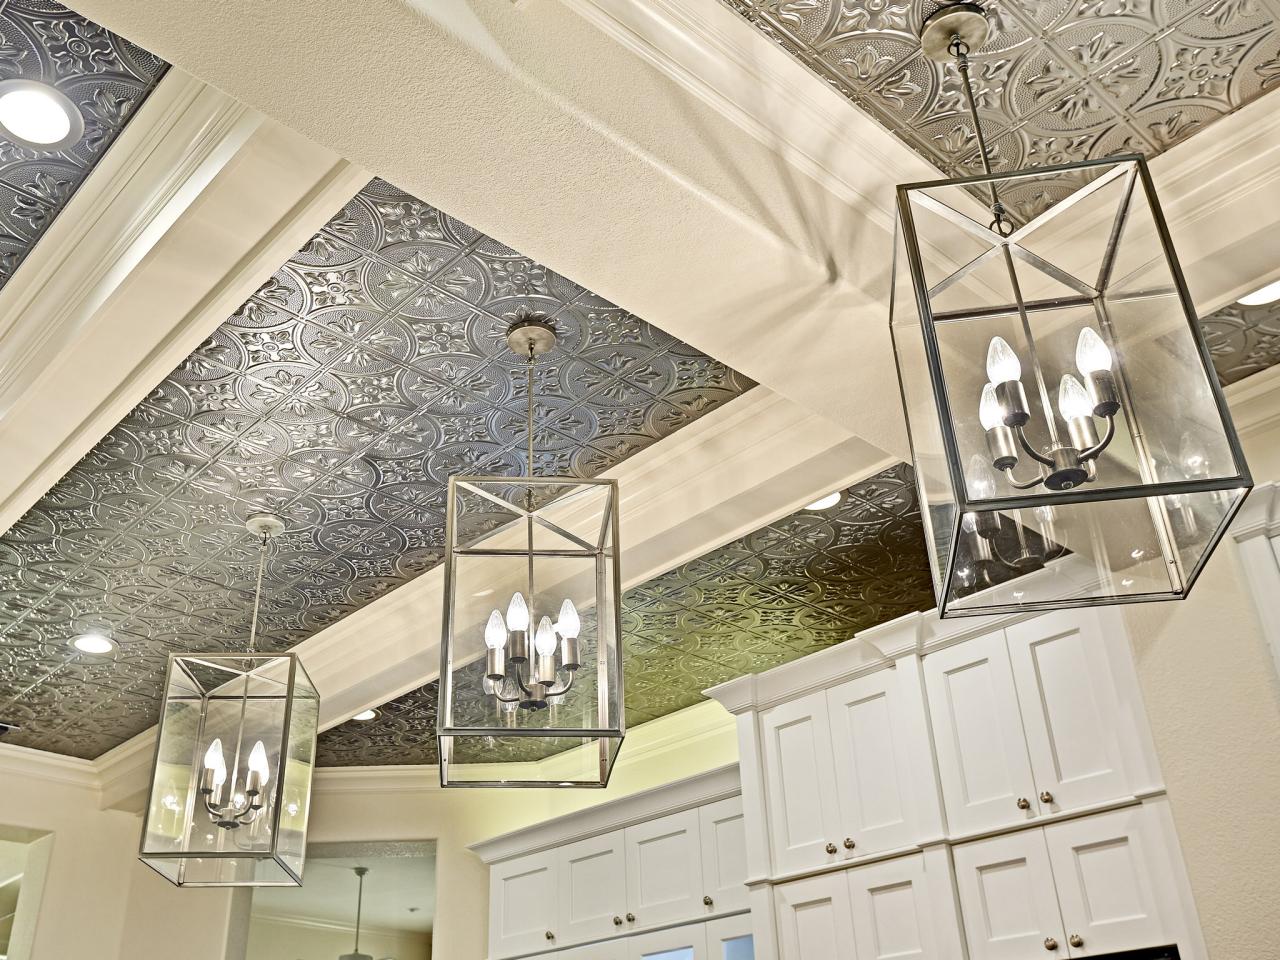 Great Ideas For Upgrading Your Ceiling, How To Install Tin Ceiling Tiles Over Popcorn